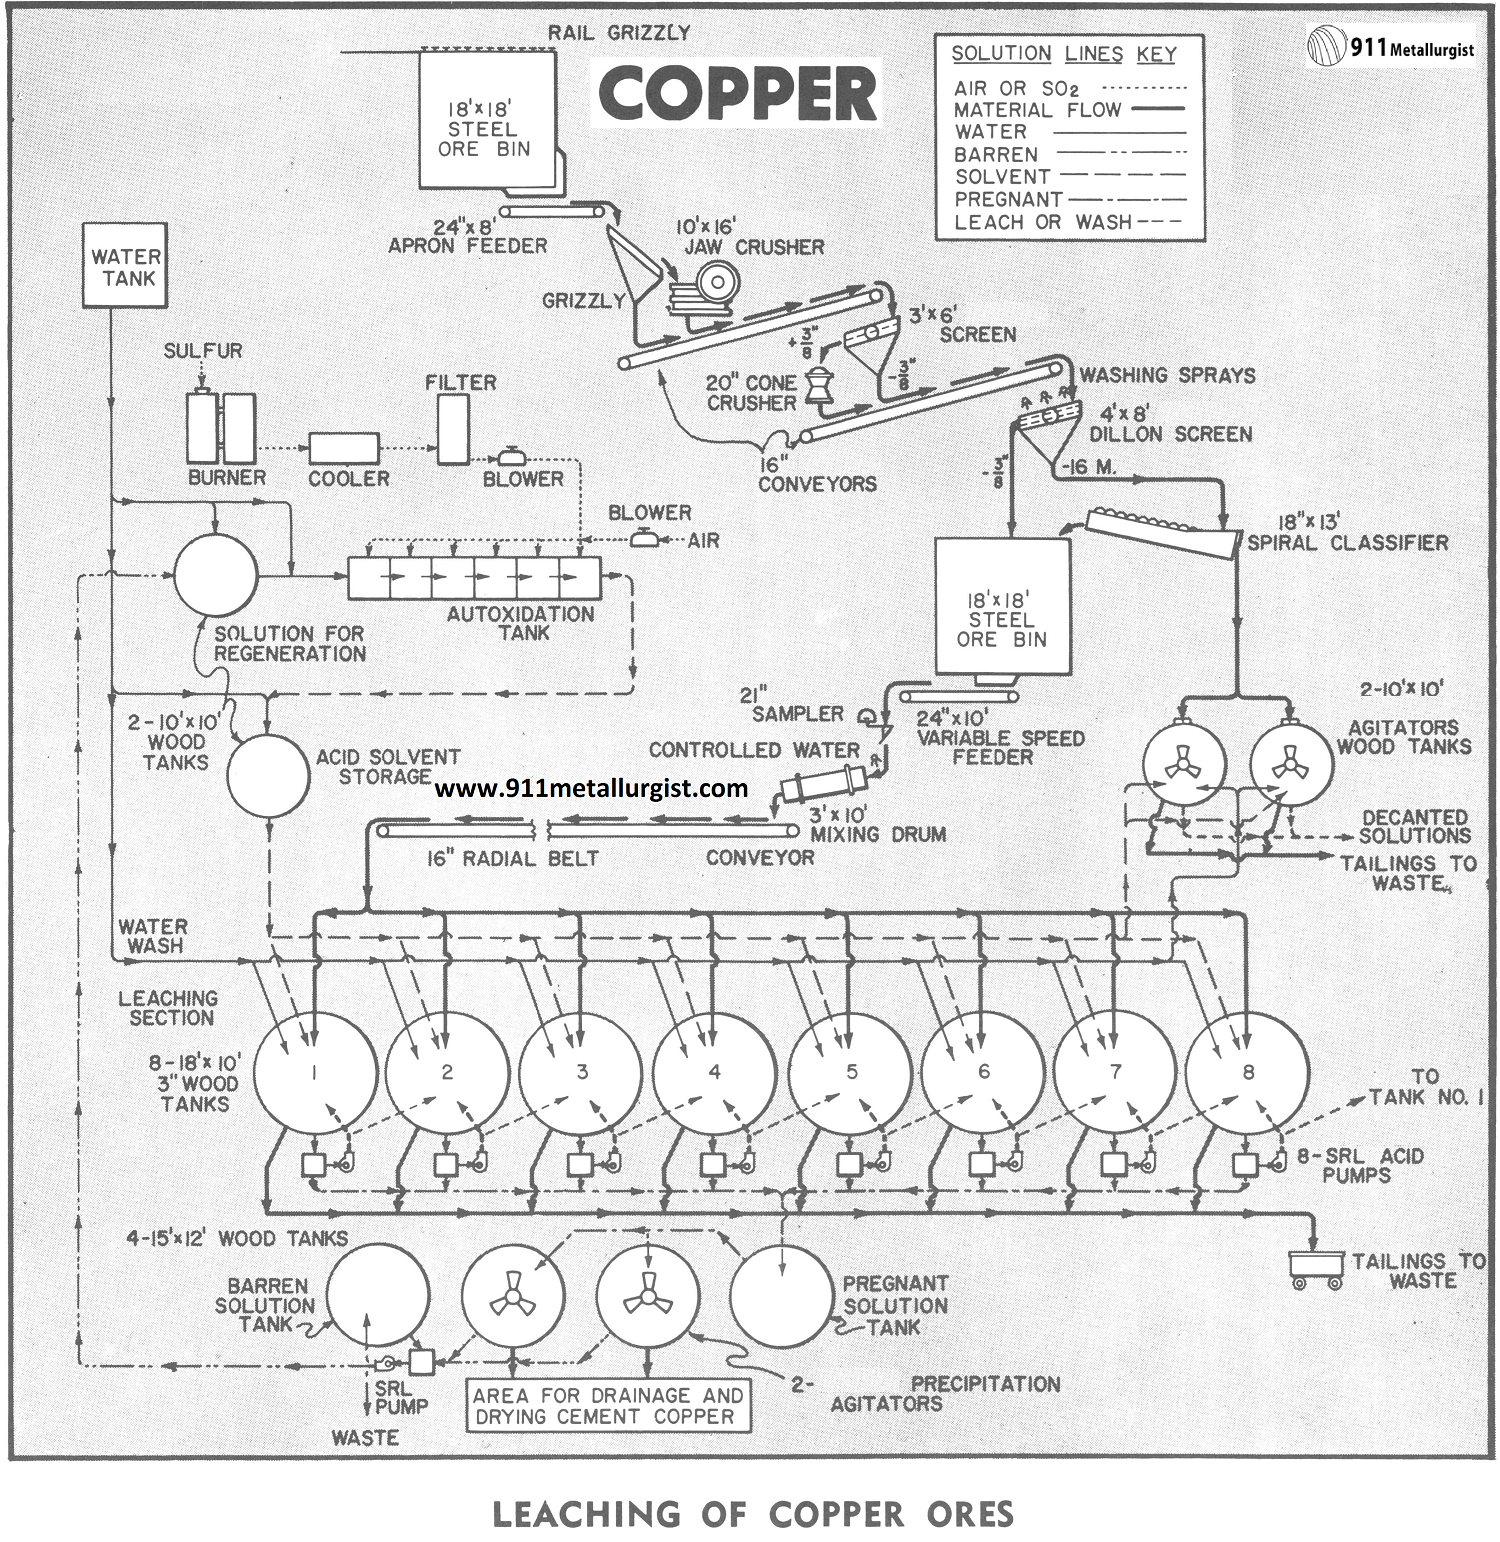 Leaching of Copper Ores